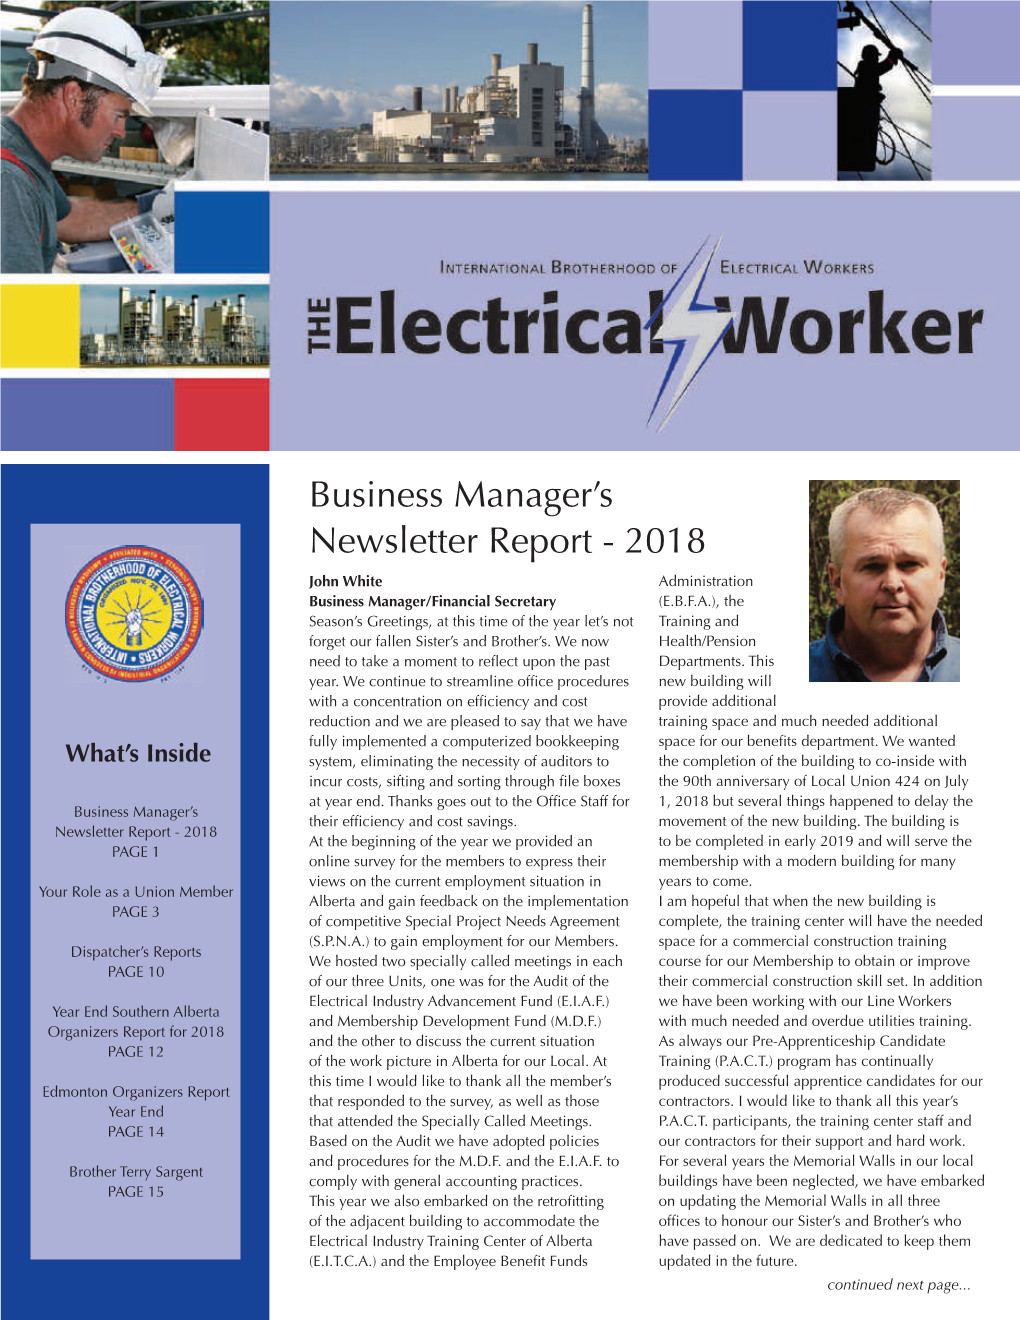 Business Manager's Newsletter Report